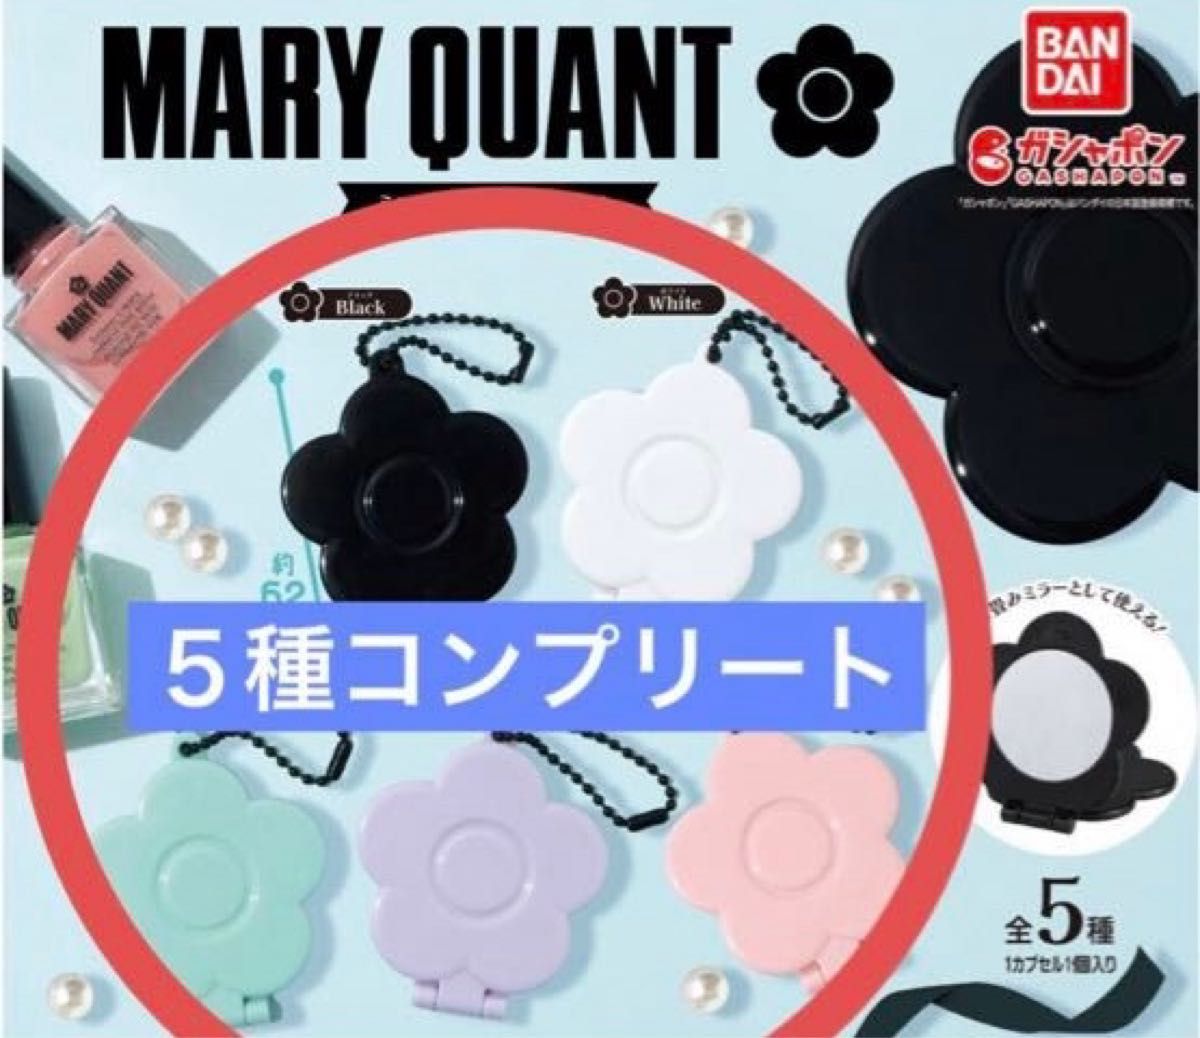 MARY QUANT マリークワント マリクワ カプセルトイ ガチャ